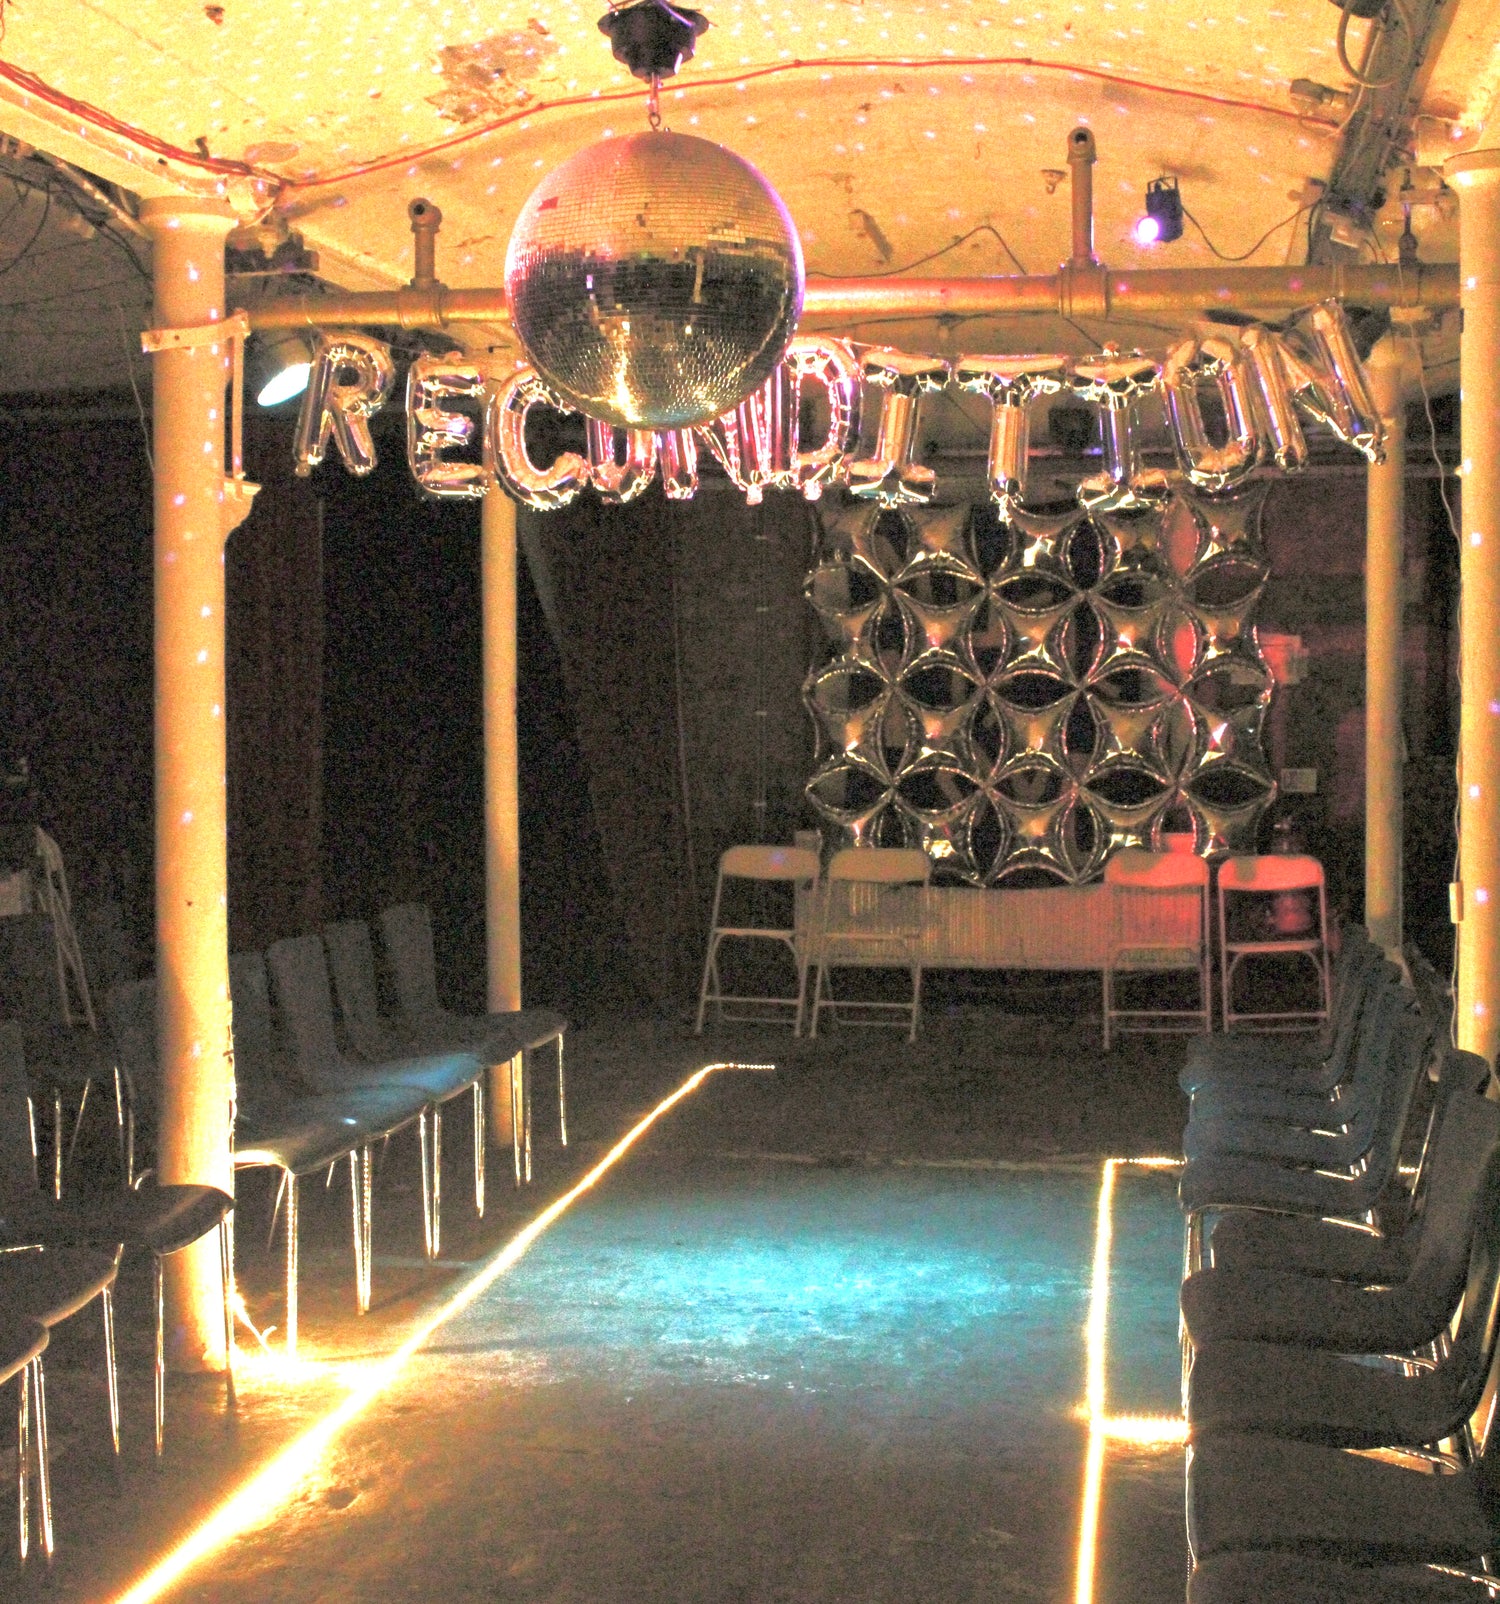 ID: Image of the Recondition catwalk decorated with silver balloons and warm lights